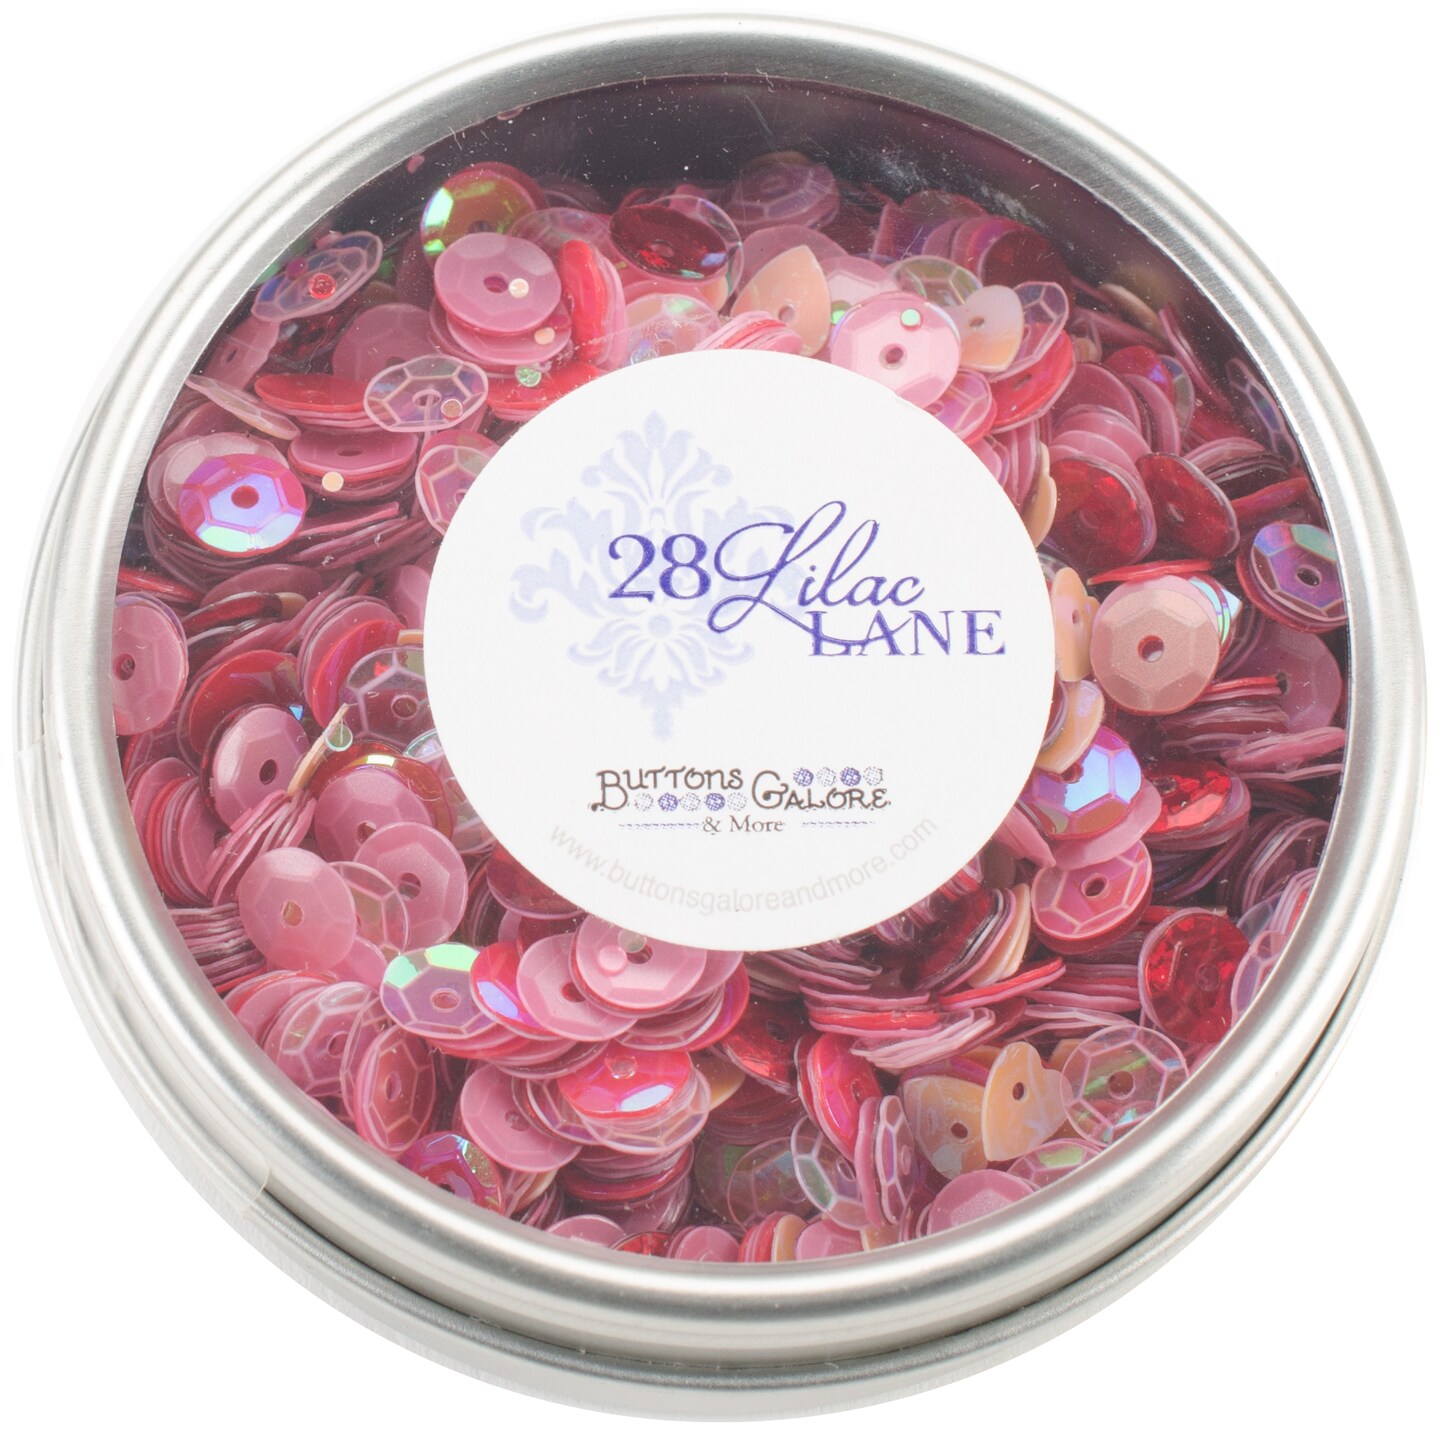 Buttons Galore 28 Lilac Lane Tin W/Sequins 40g-My Valentine